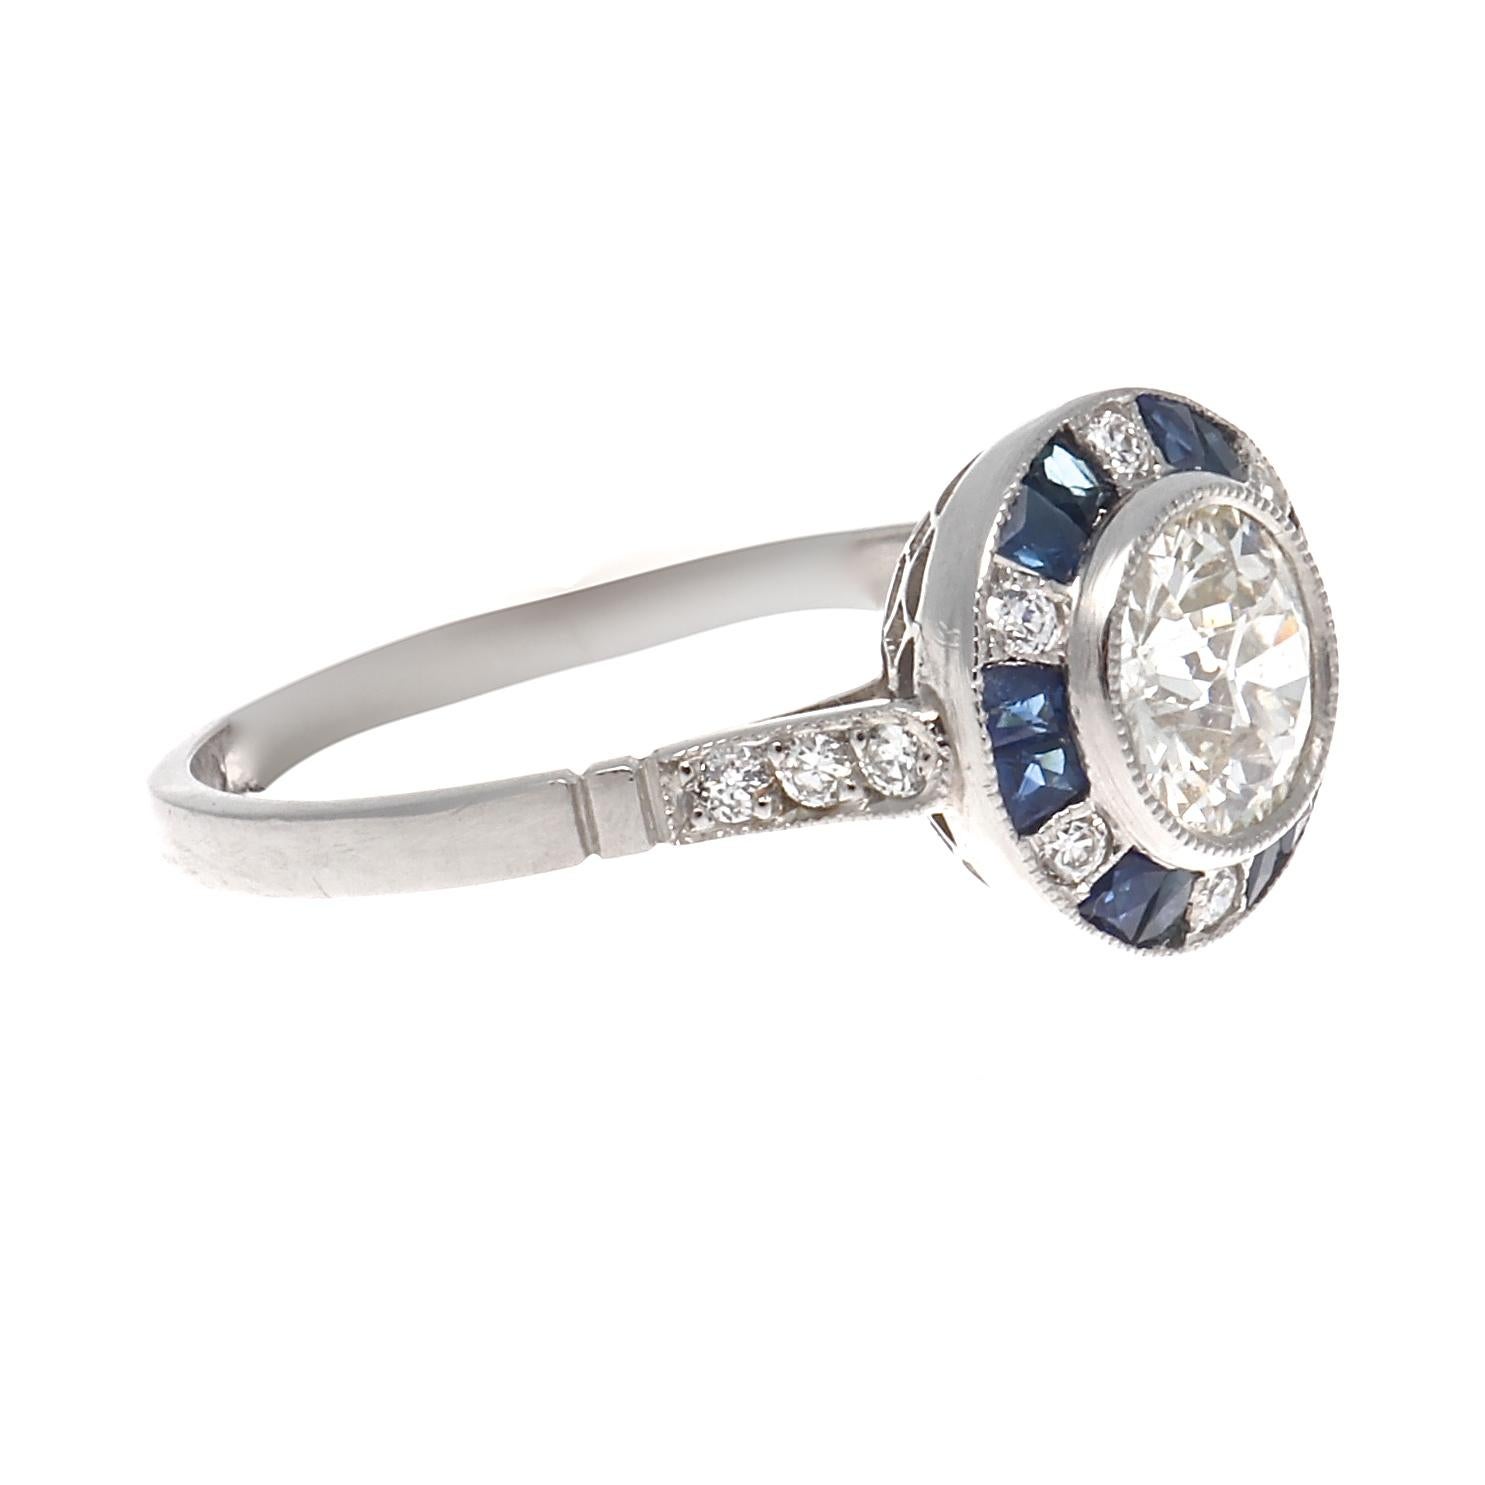 Radiating brilliance through colorful modern design. Featuring a 0.73 carat round brilliant cut diamond that is I color, VS2 clarity creatively surrounded by sectors of navy blue sapphires and diamonds. Hand crafted in platinum. Ring size 7-1/4 and